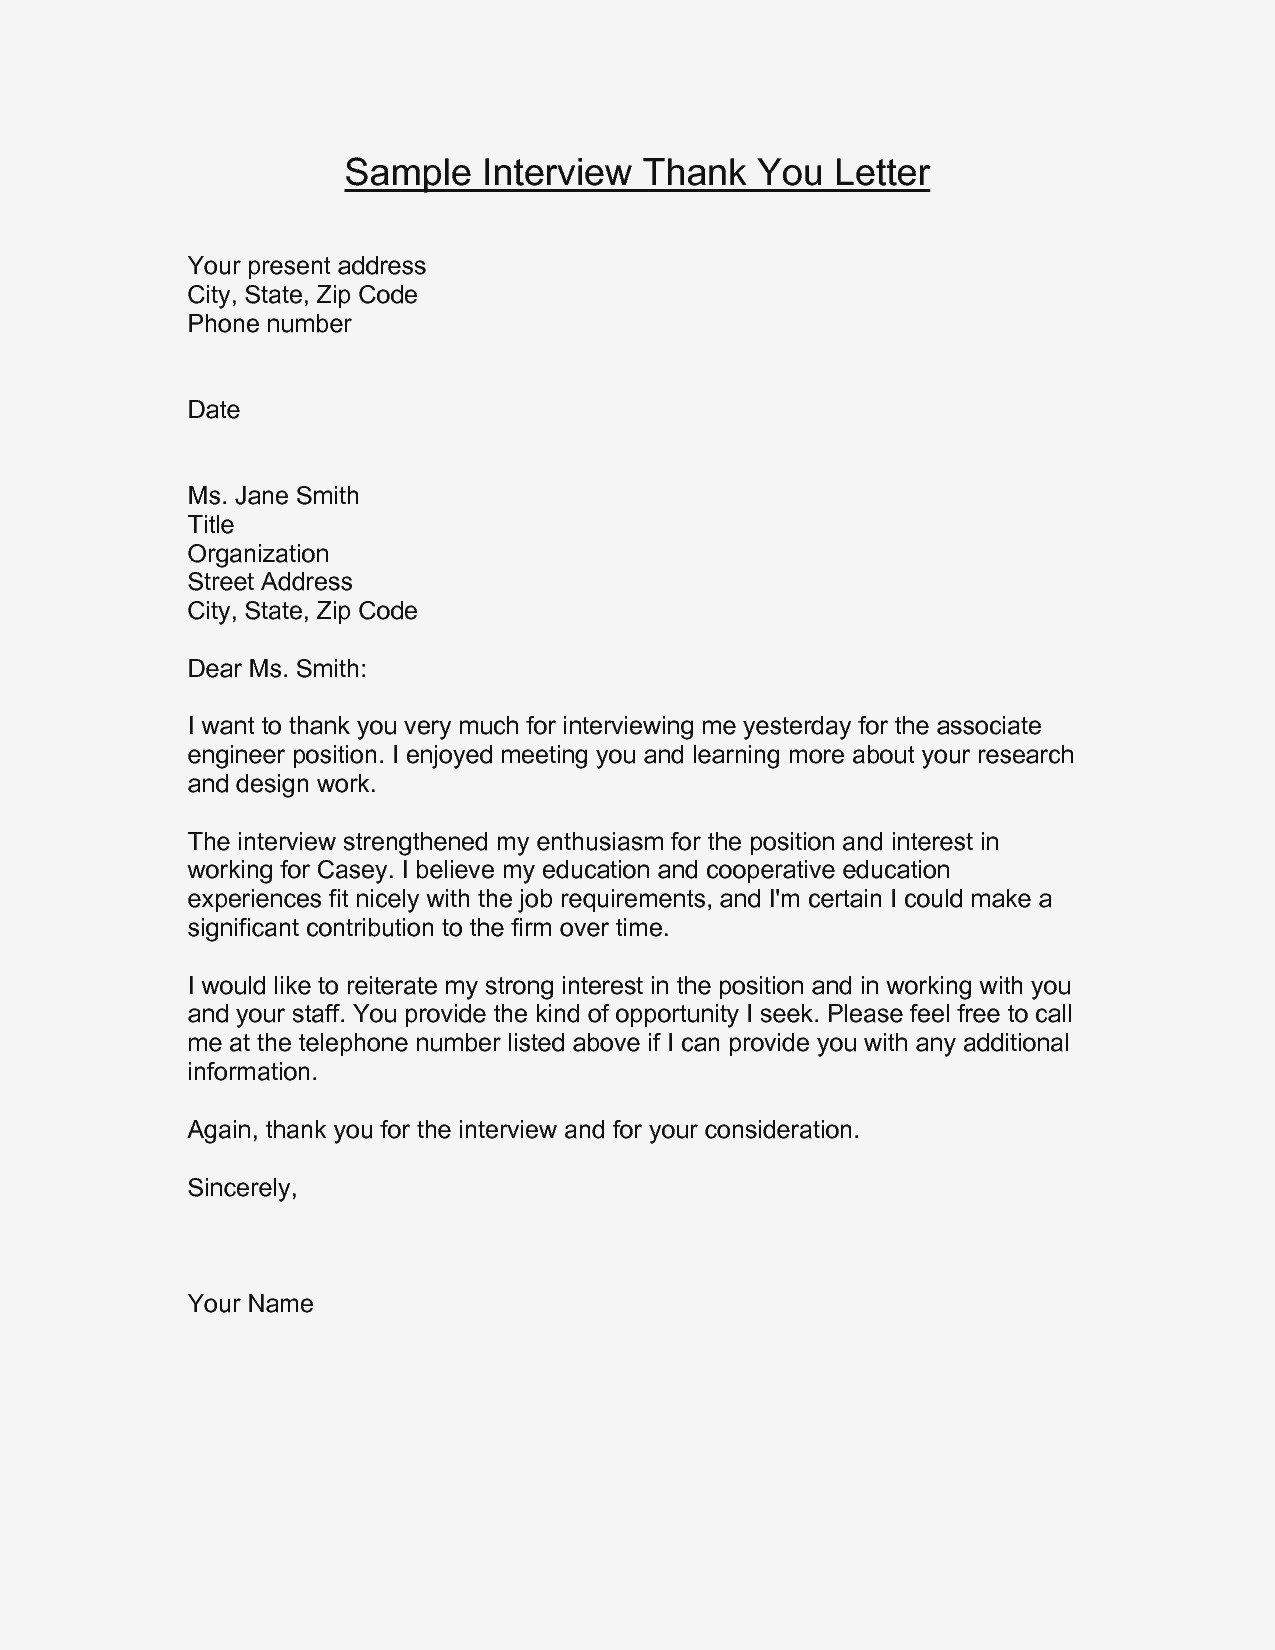 Template Letter Unsuccessful Job Interview New Sample Thank You Document After Via Email